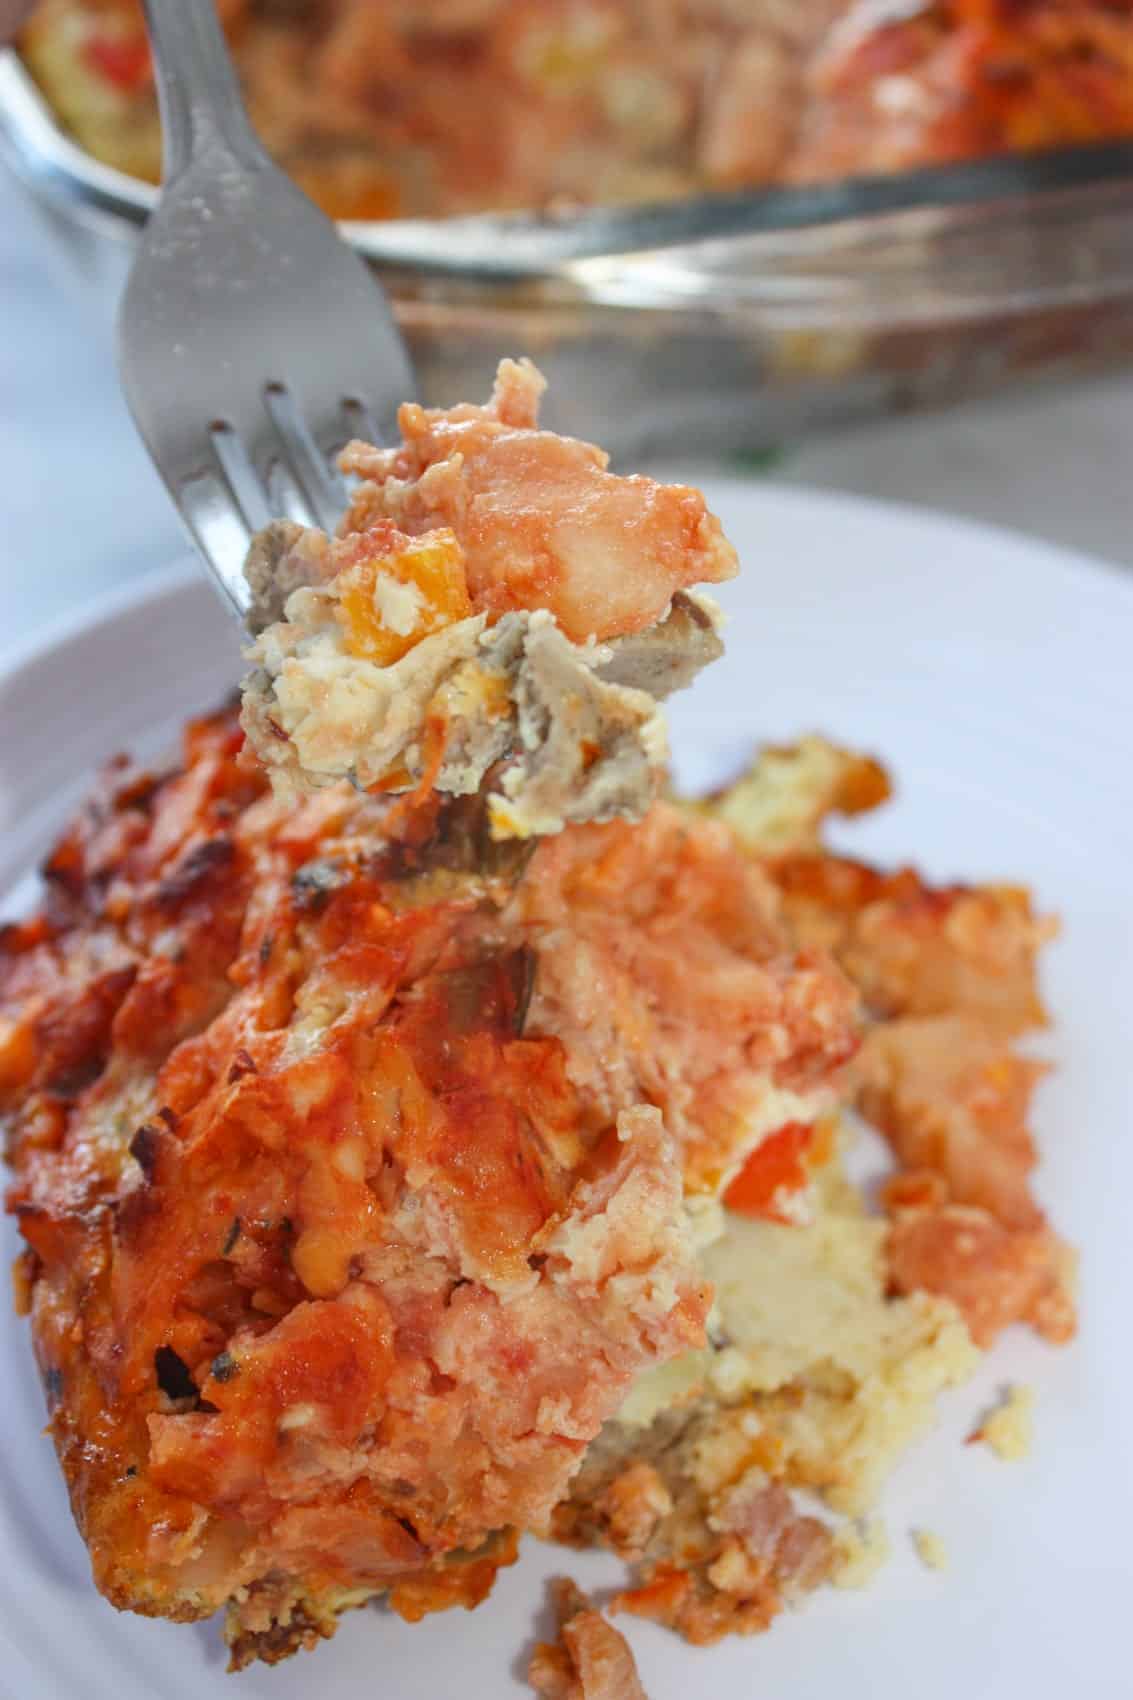 Loaded Breakfast Casserole is a hearty breakfast or brunch option that is loaded with flavour and goodness.  Serve it paired with a fruit salad for a complete meal.